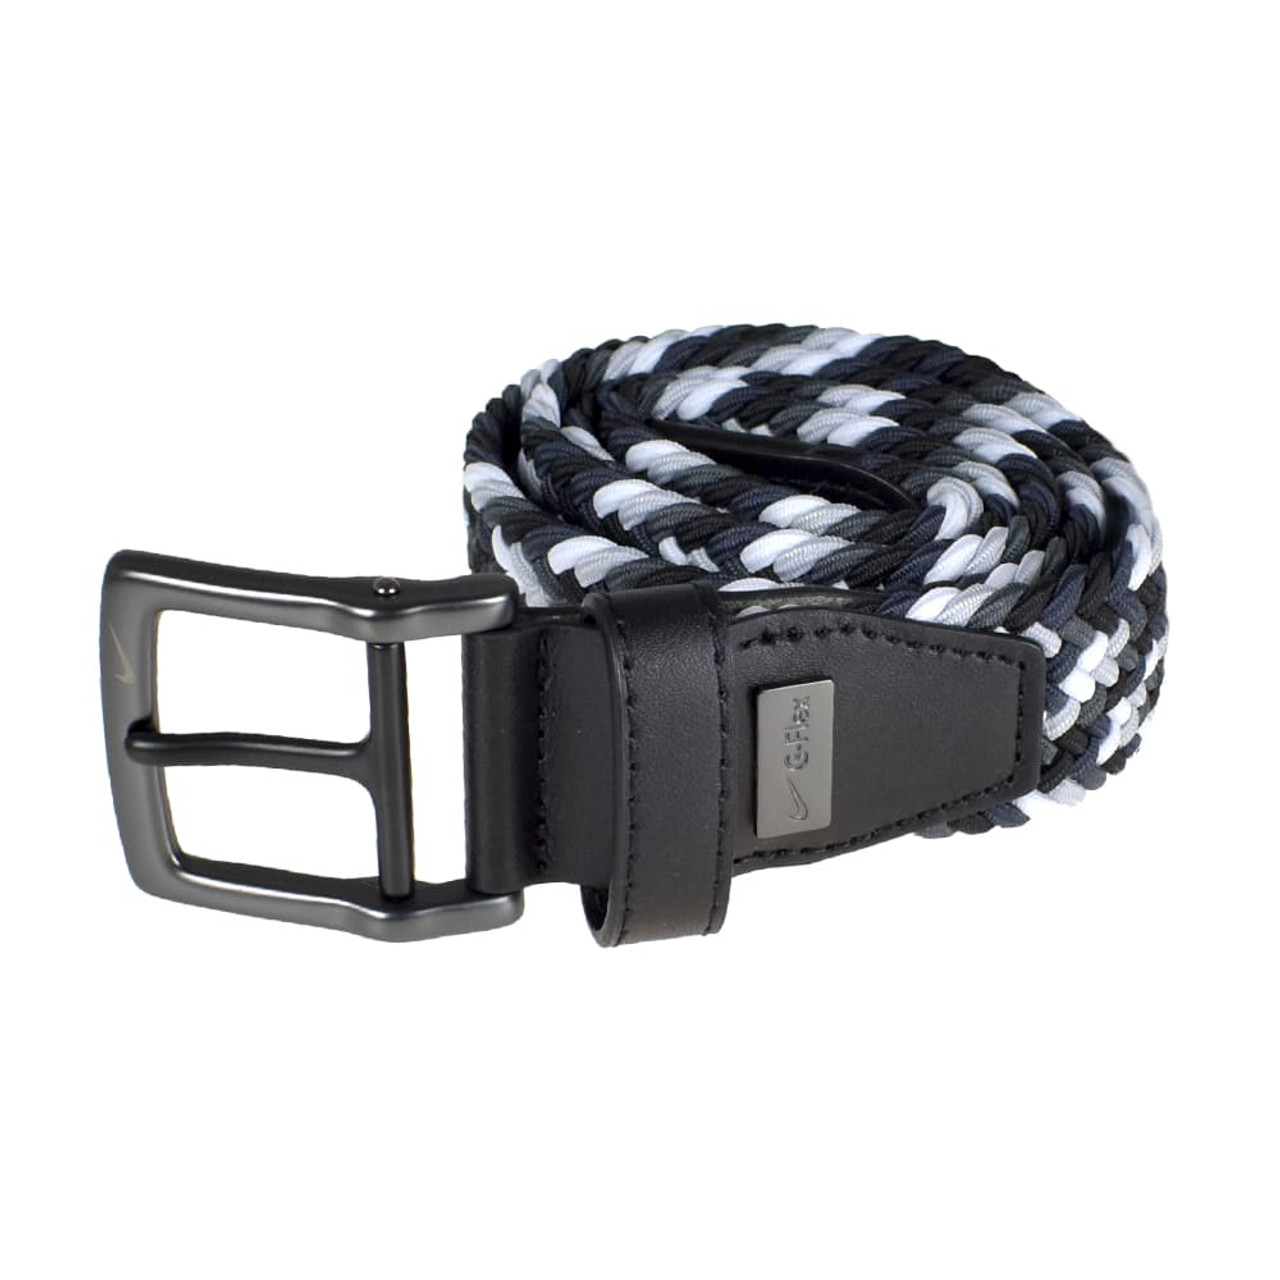 Under Armour Braided 2.0 Belt, Belts, Clothing & Accessories